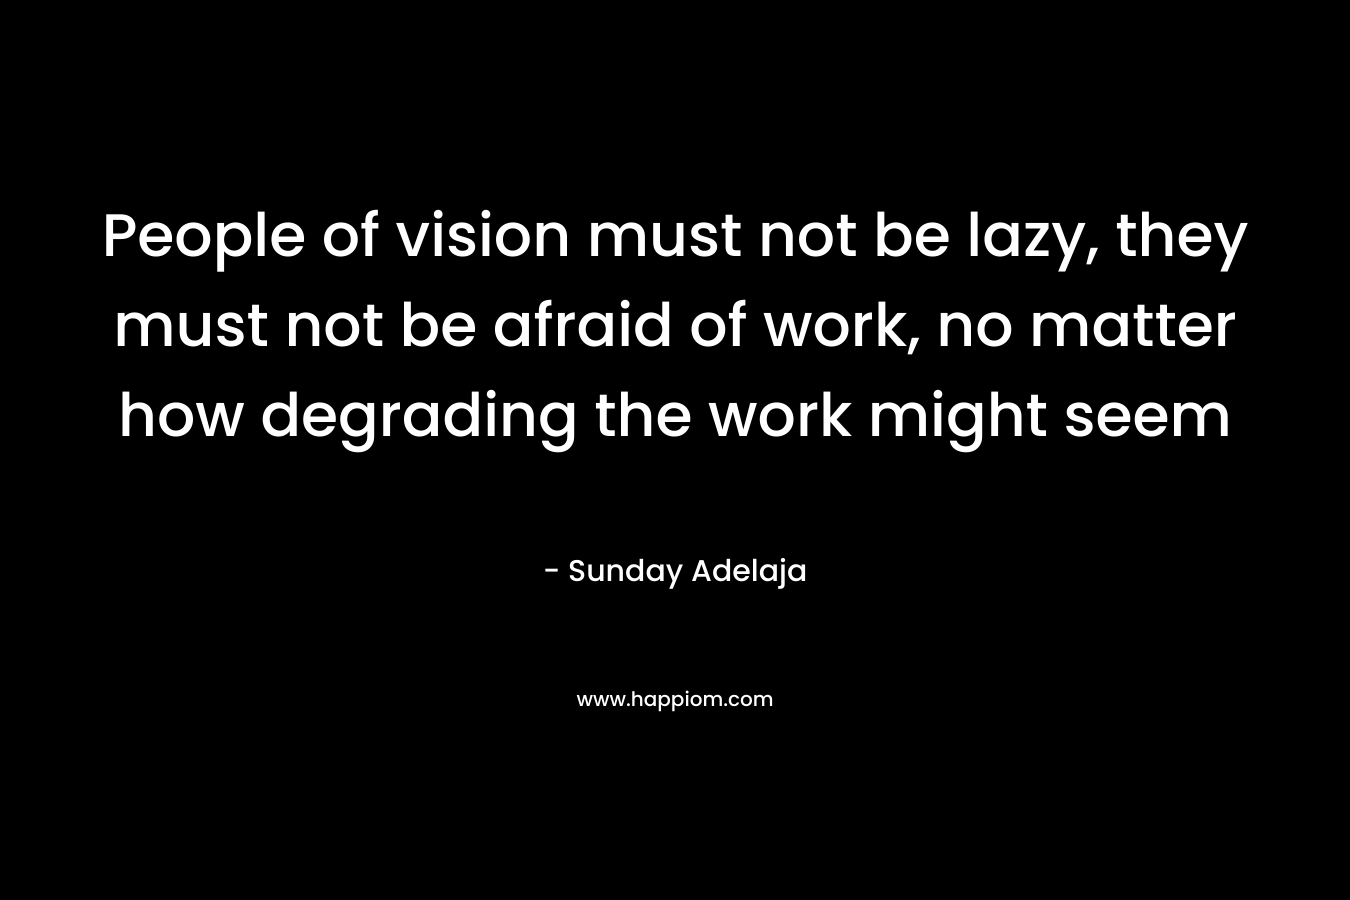 People of vision must not be lazy, they must not be afraid of work, no matter how degrading the work might seem – Sunday Adelaja